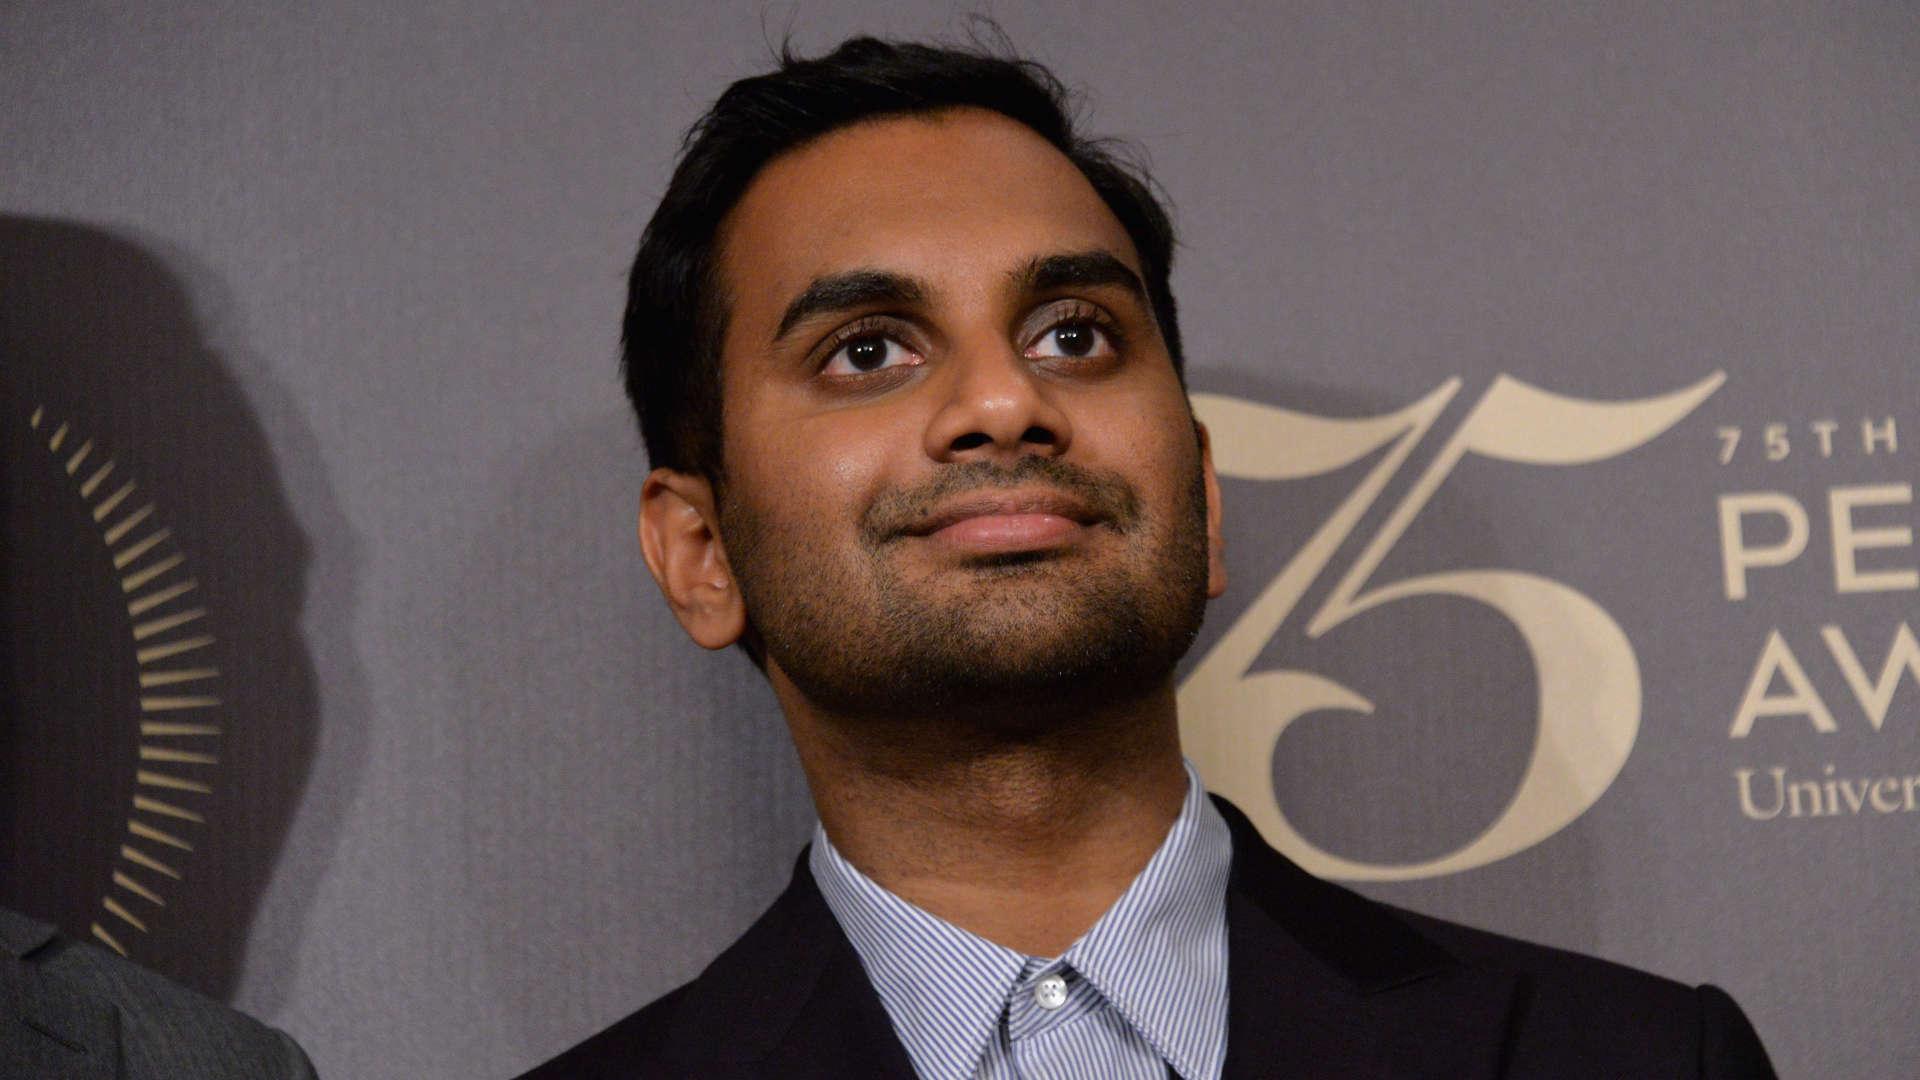 Aziz Ansari returns after sexual misconduct allegations